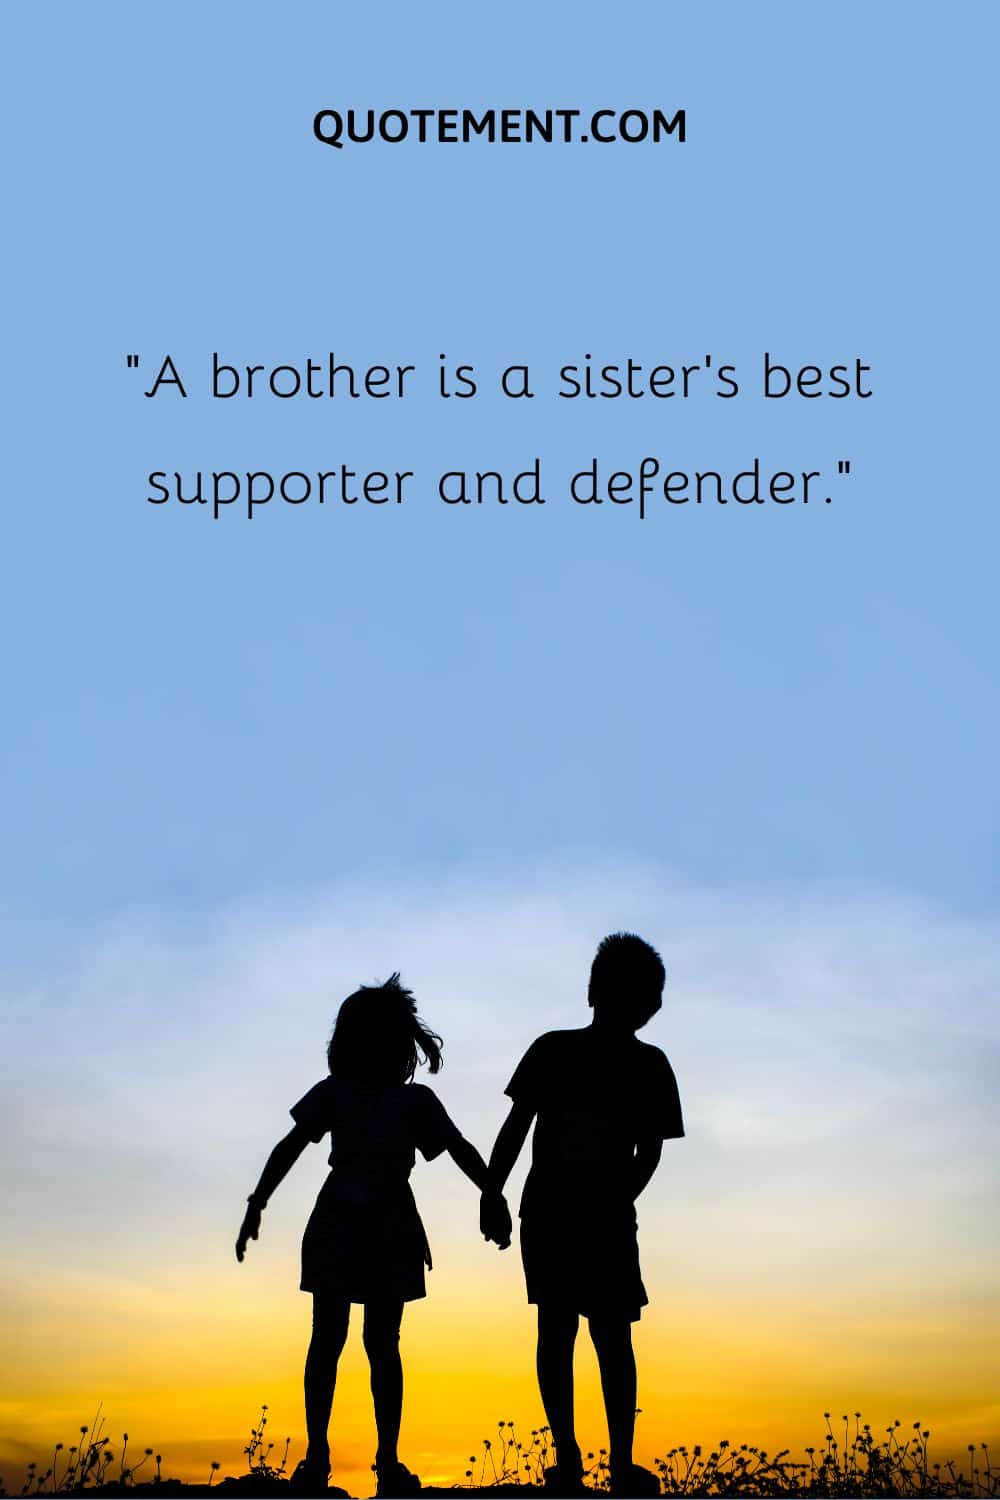 “A brother is a sister's best supporter and defender.”